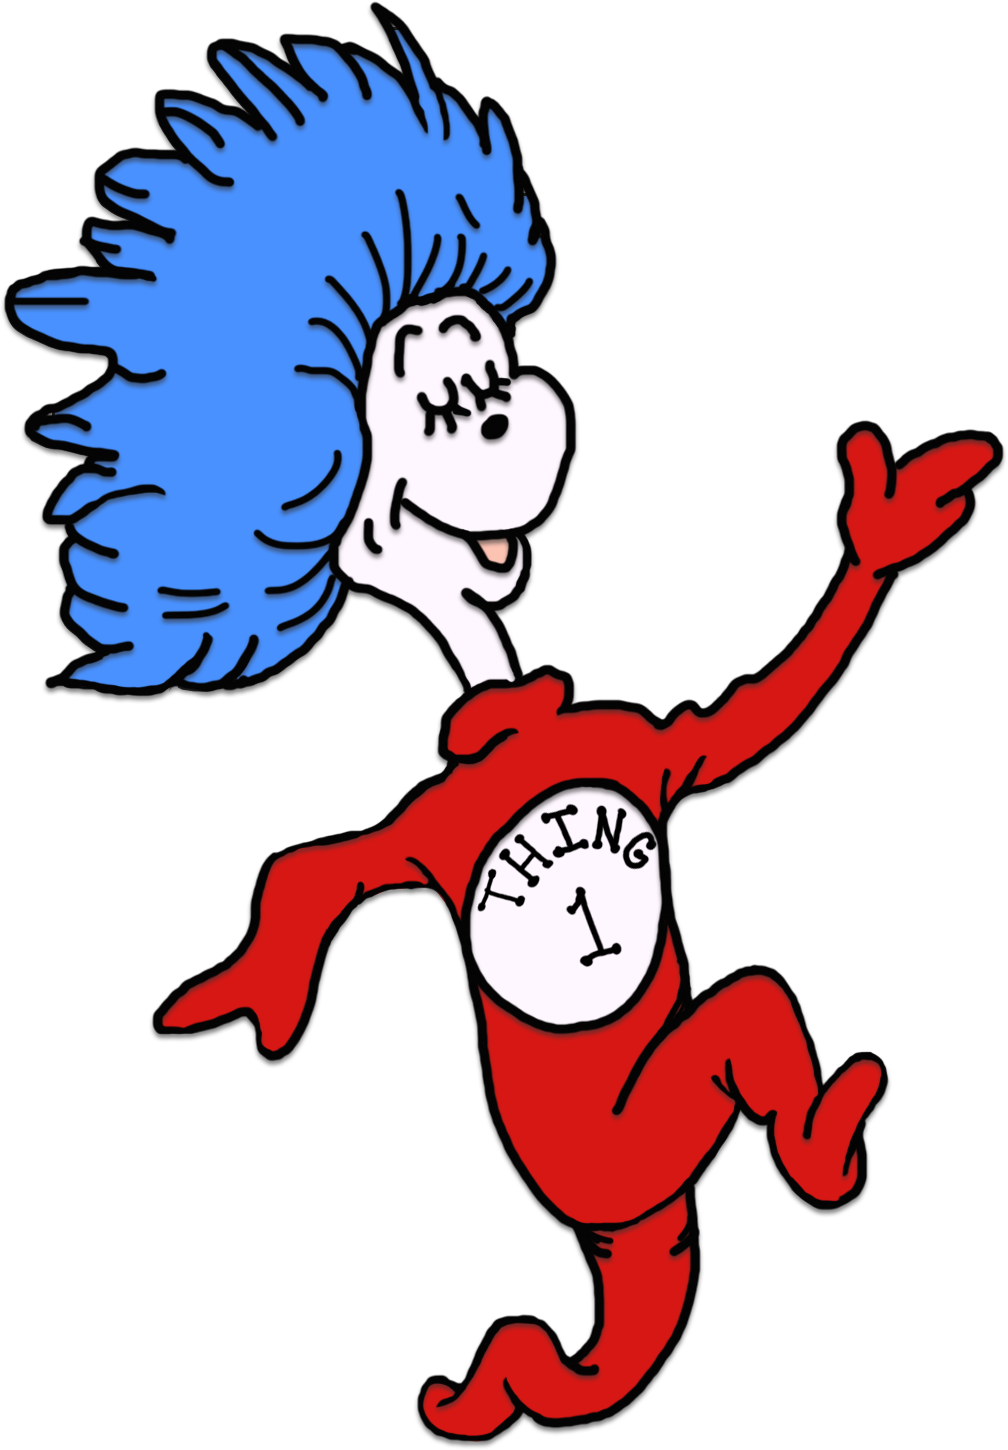 Dr Seuss Coloring Pages Thing 1 And Thing 2 Thing 1 And Thing 2